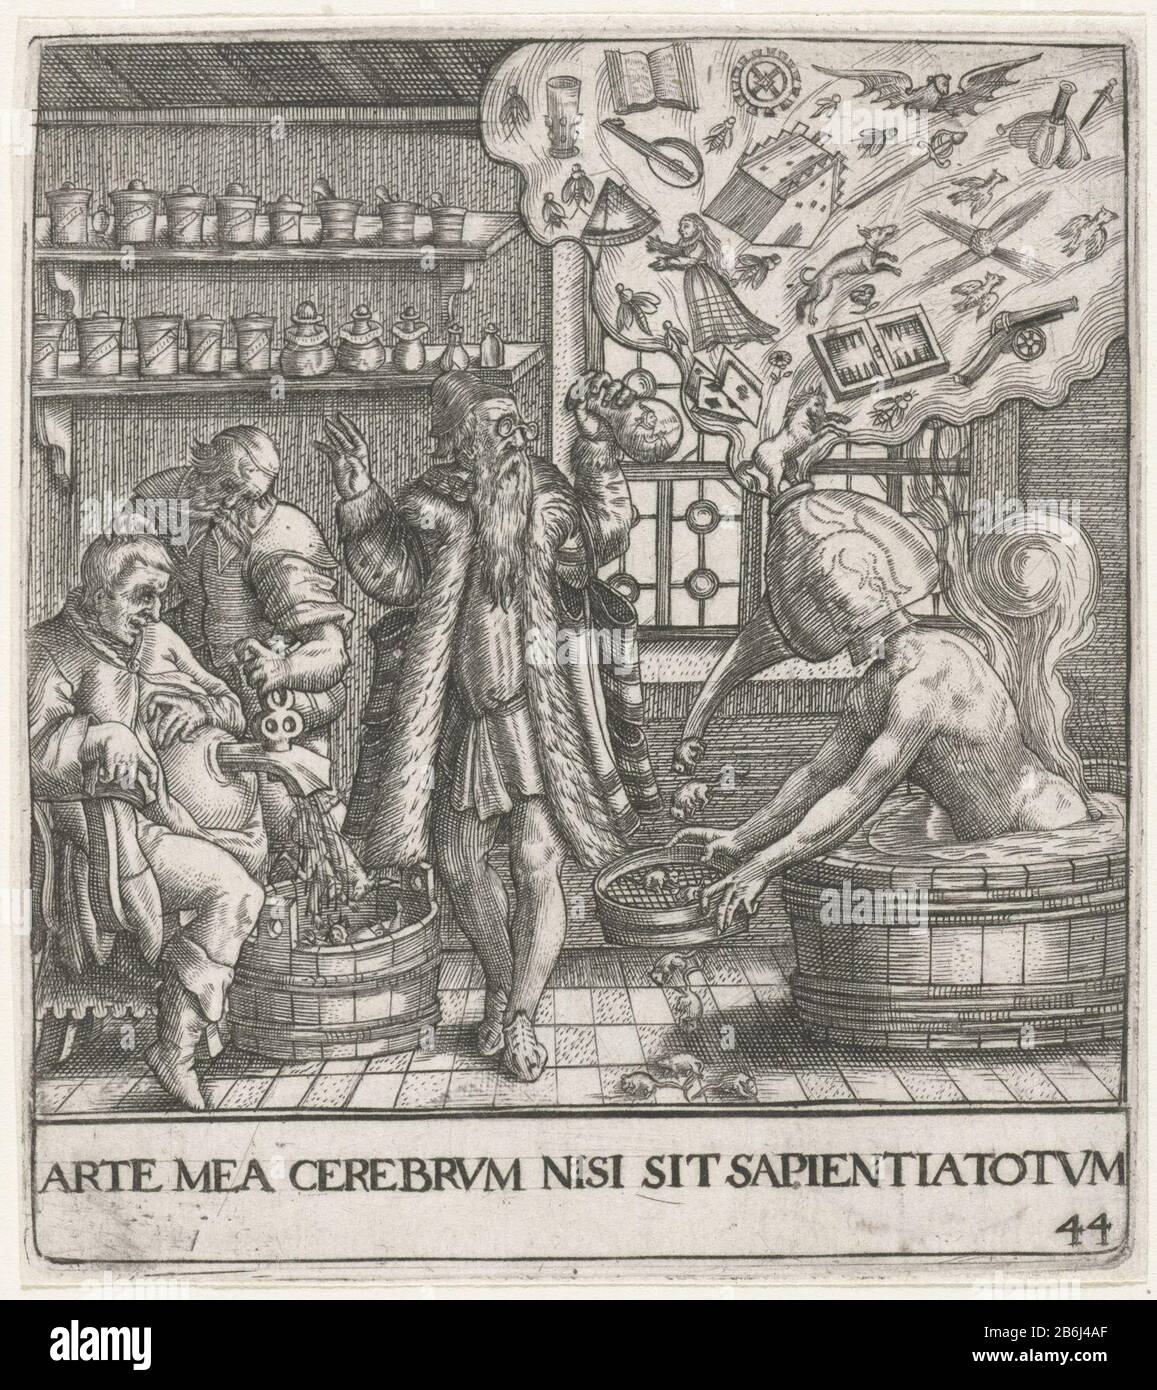 The narrendokter by my BRAIN unless SAPIENTIATOTUM (titel op object), the secular Emblem, 1596 (serietitel) a treatment from a doctor ', which occur remarkable scenes . A man sitting in a wooden tub, a retort on his head, where his delusions in the form of objects that refer to money, war and superficial pastimes and mercenary love, be distilled. They returned after treatment to worries and fall like dead mice through a sieve, which stops the man with both hands. In the middle is a learned physician - in the corresponding epigram 'Dr. Filzhut 'called - with glasses on, watching a little jester Stock Photo